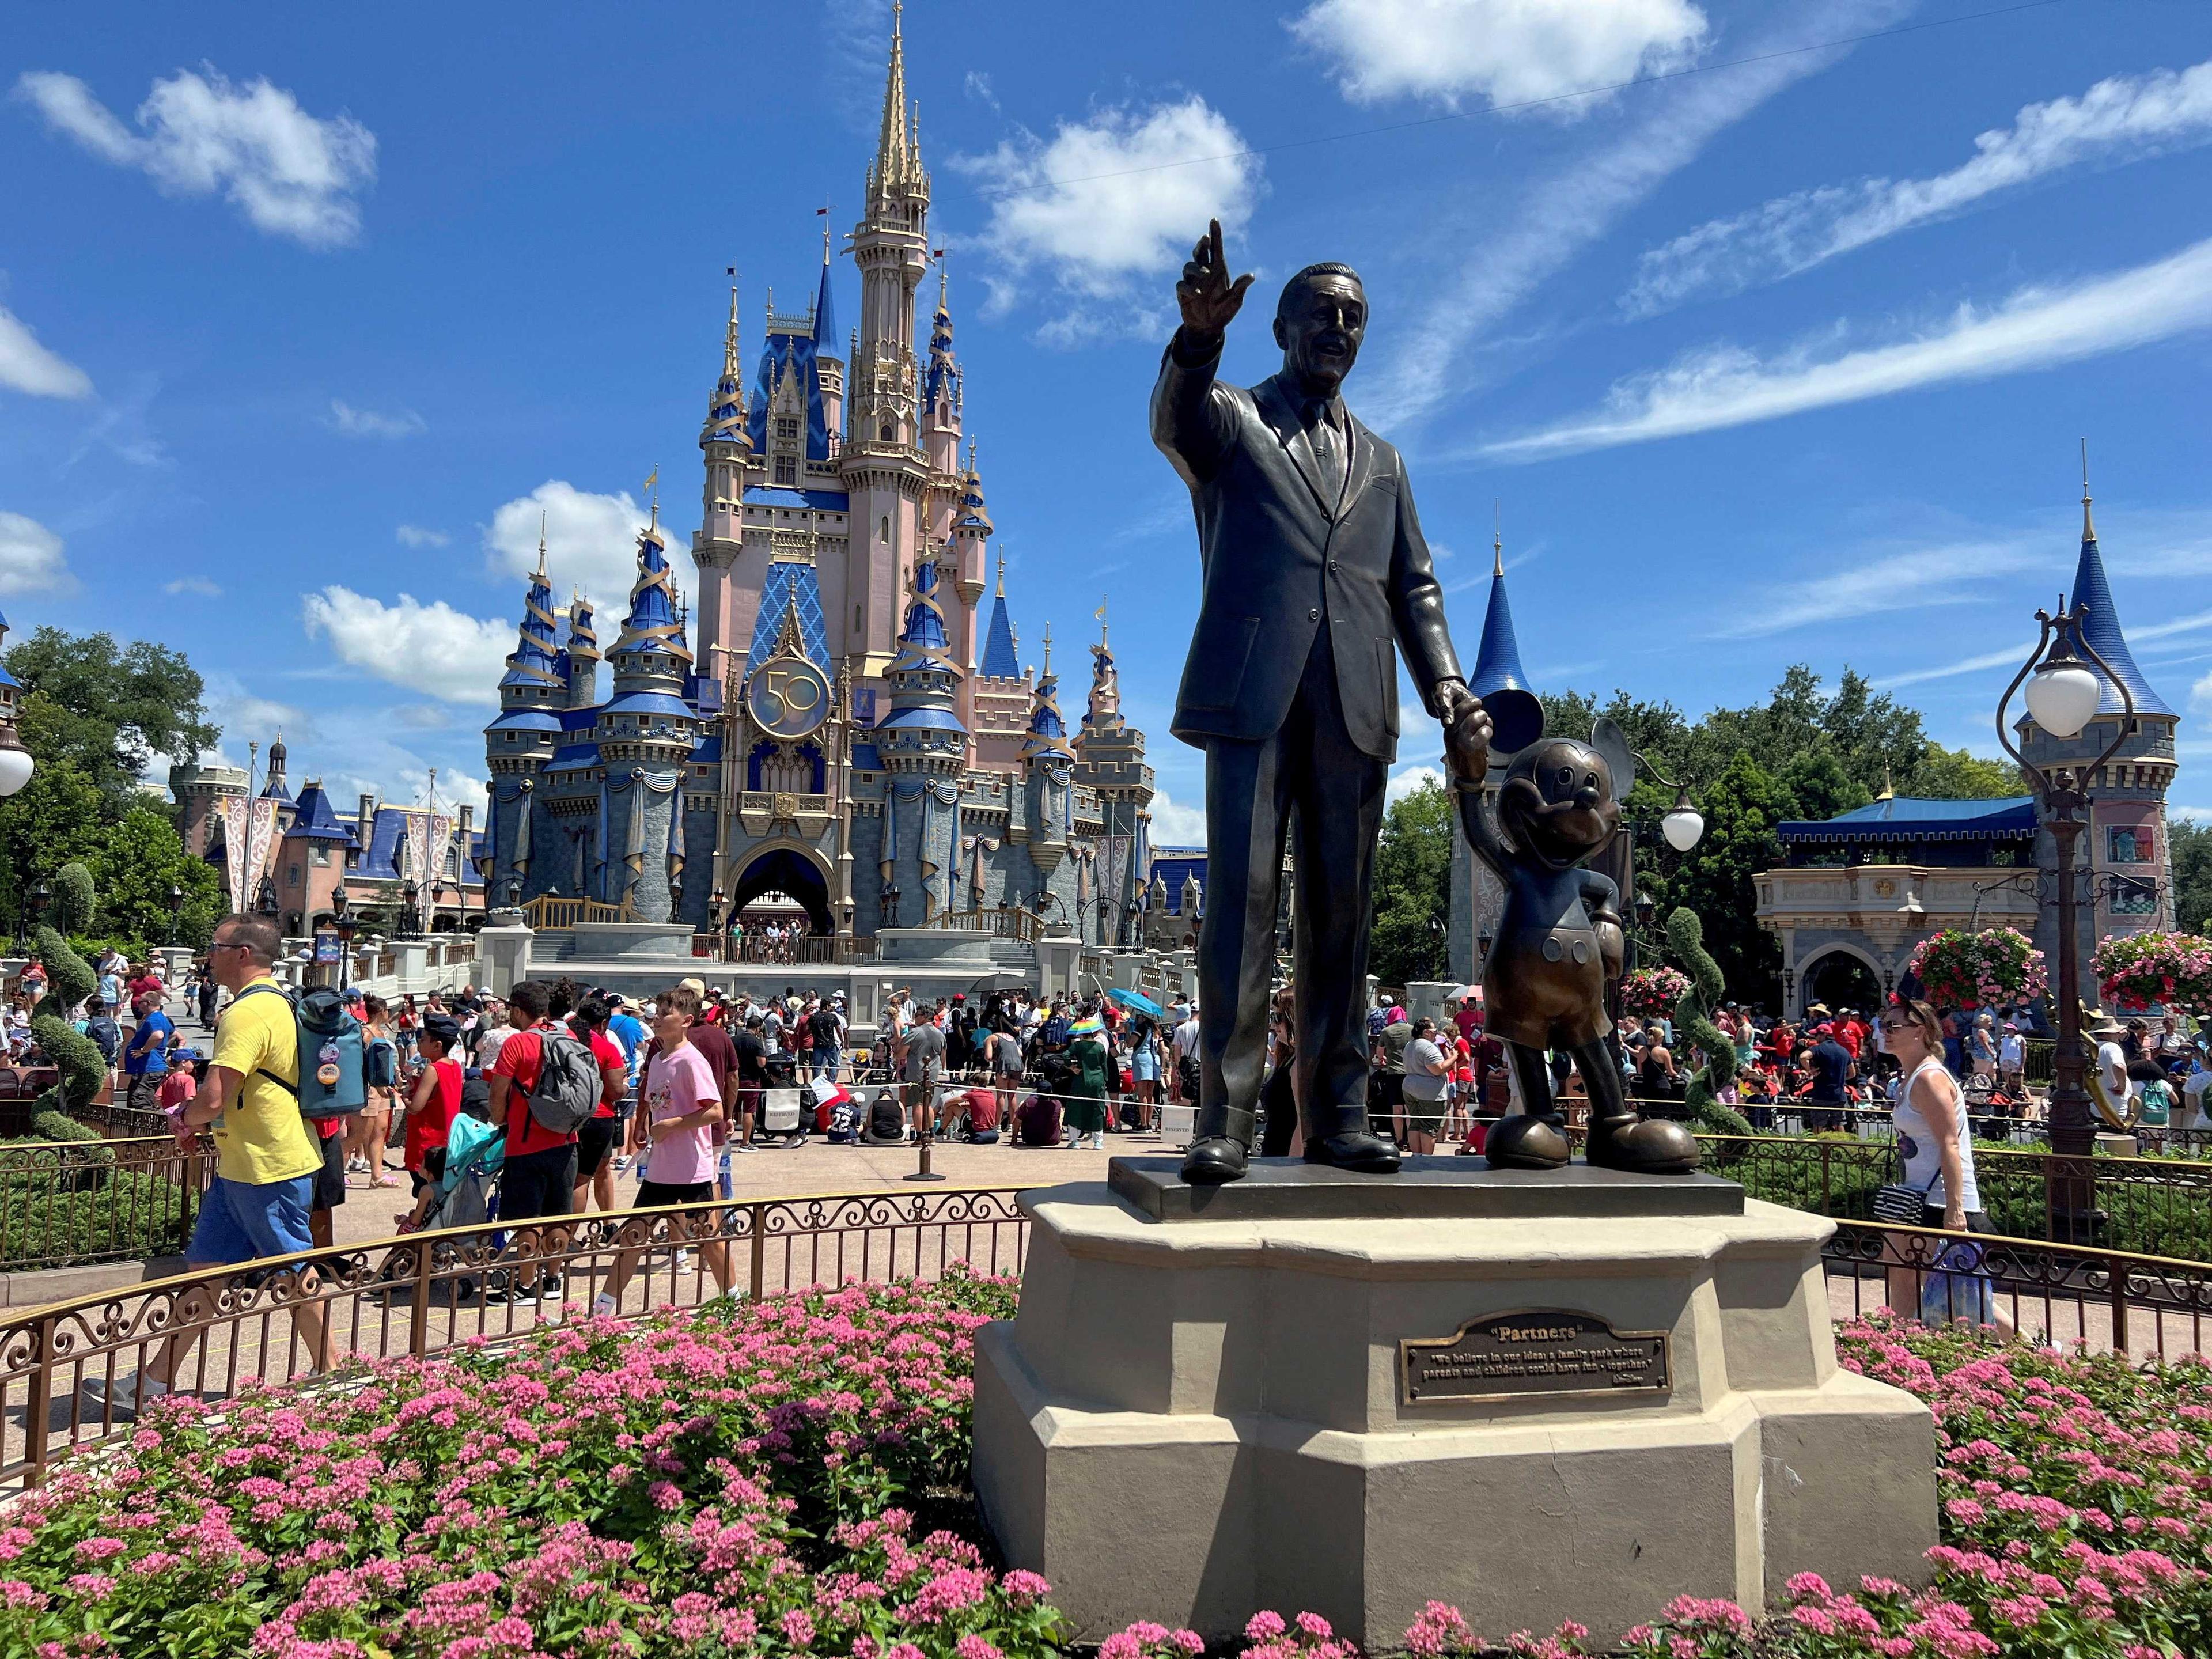 People gather at the Magic Kingdom theme park before the 'Festival of Fantasy' parade at Walt Disney World in Orlando, Florida, US July 30, 2022. Photo: Reuters